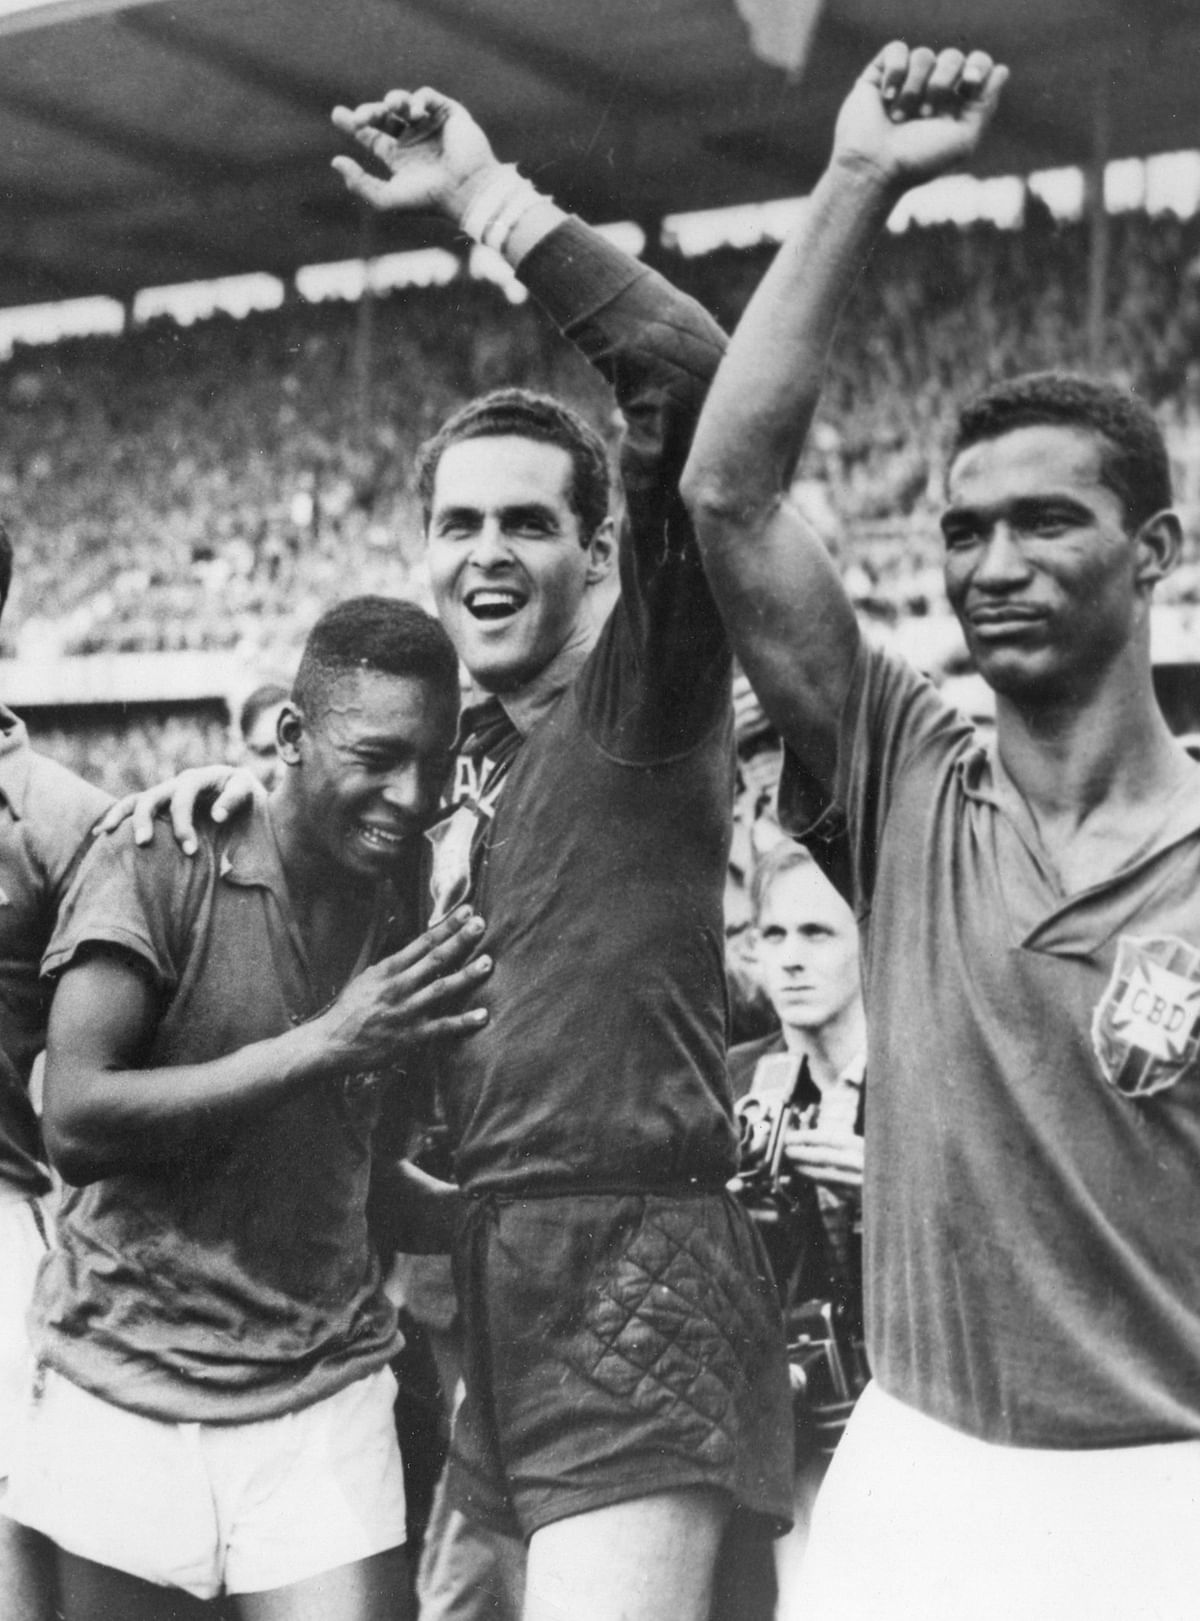 Present at each World Cup since its start in 1930, 17-year-old Pele finally helped Brazil win the World Cup in 1958